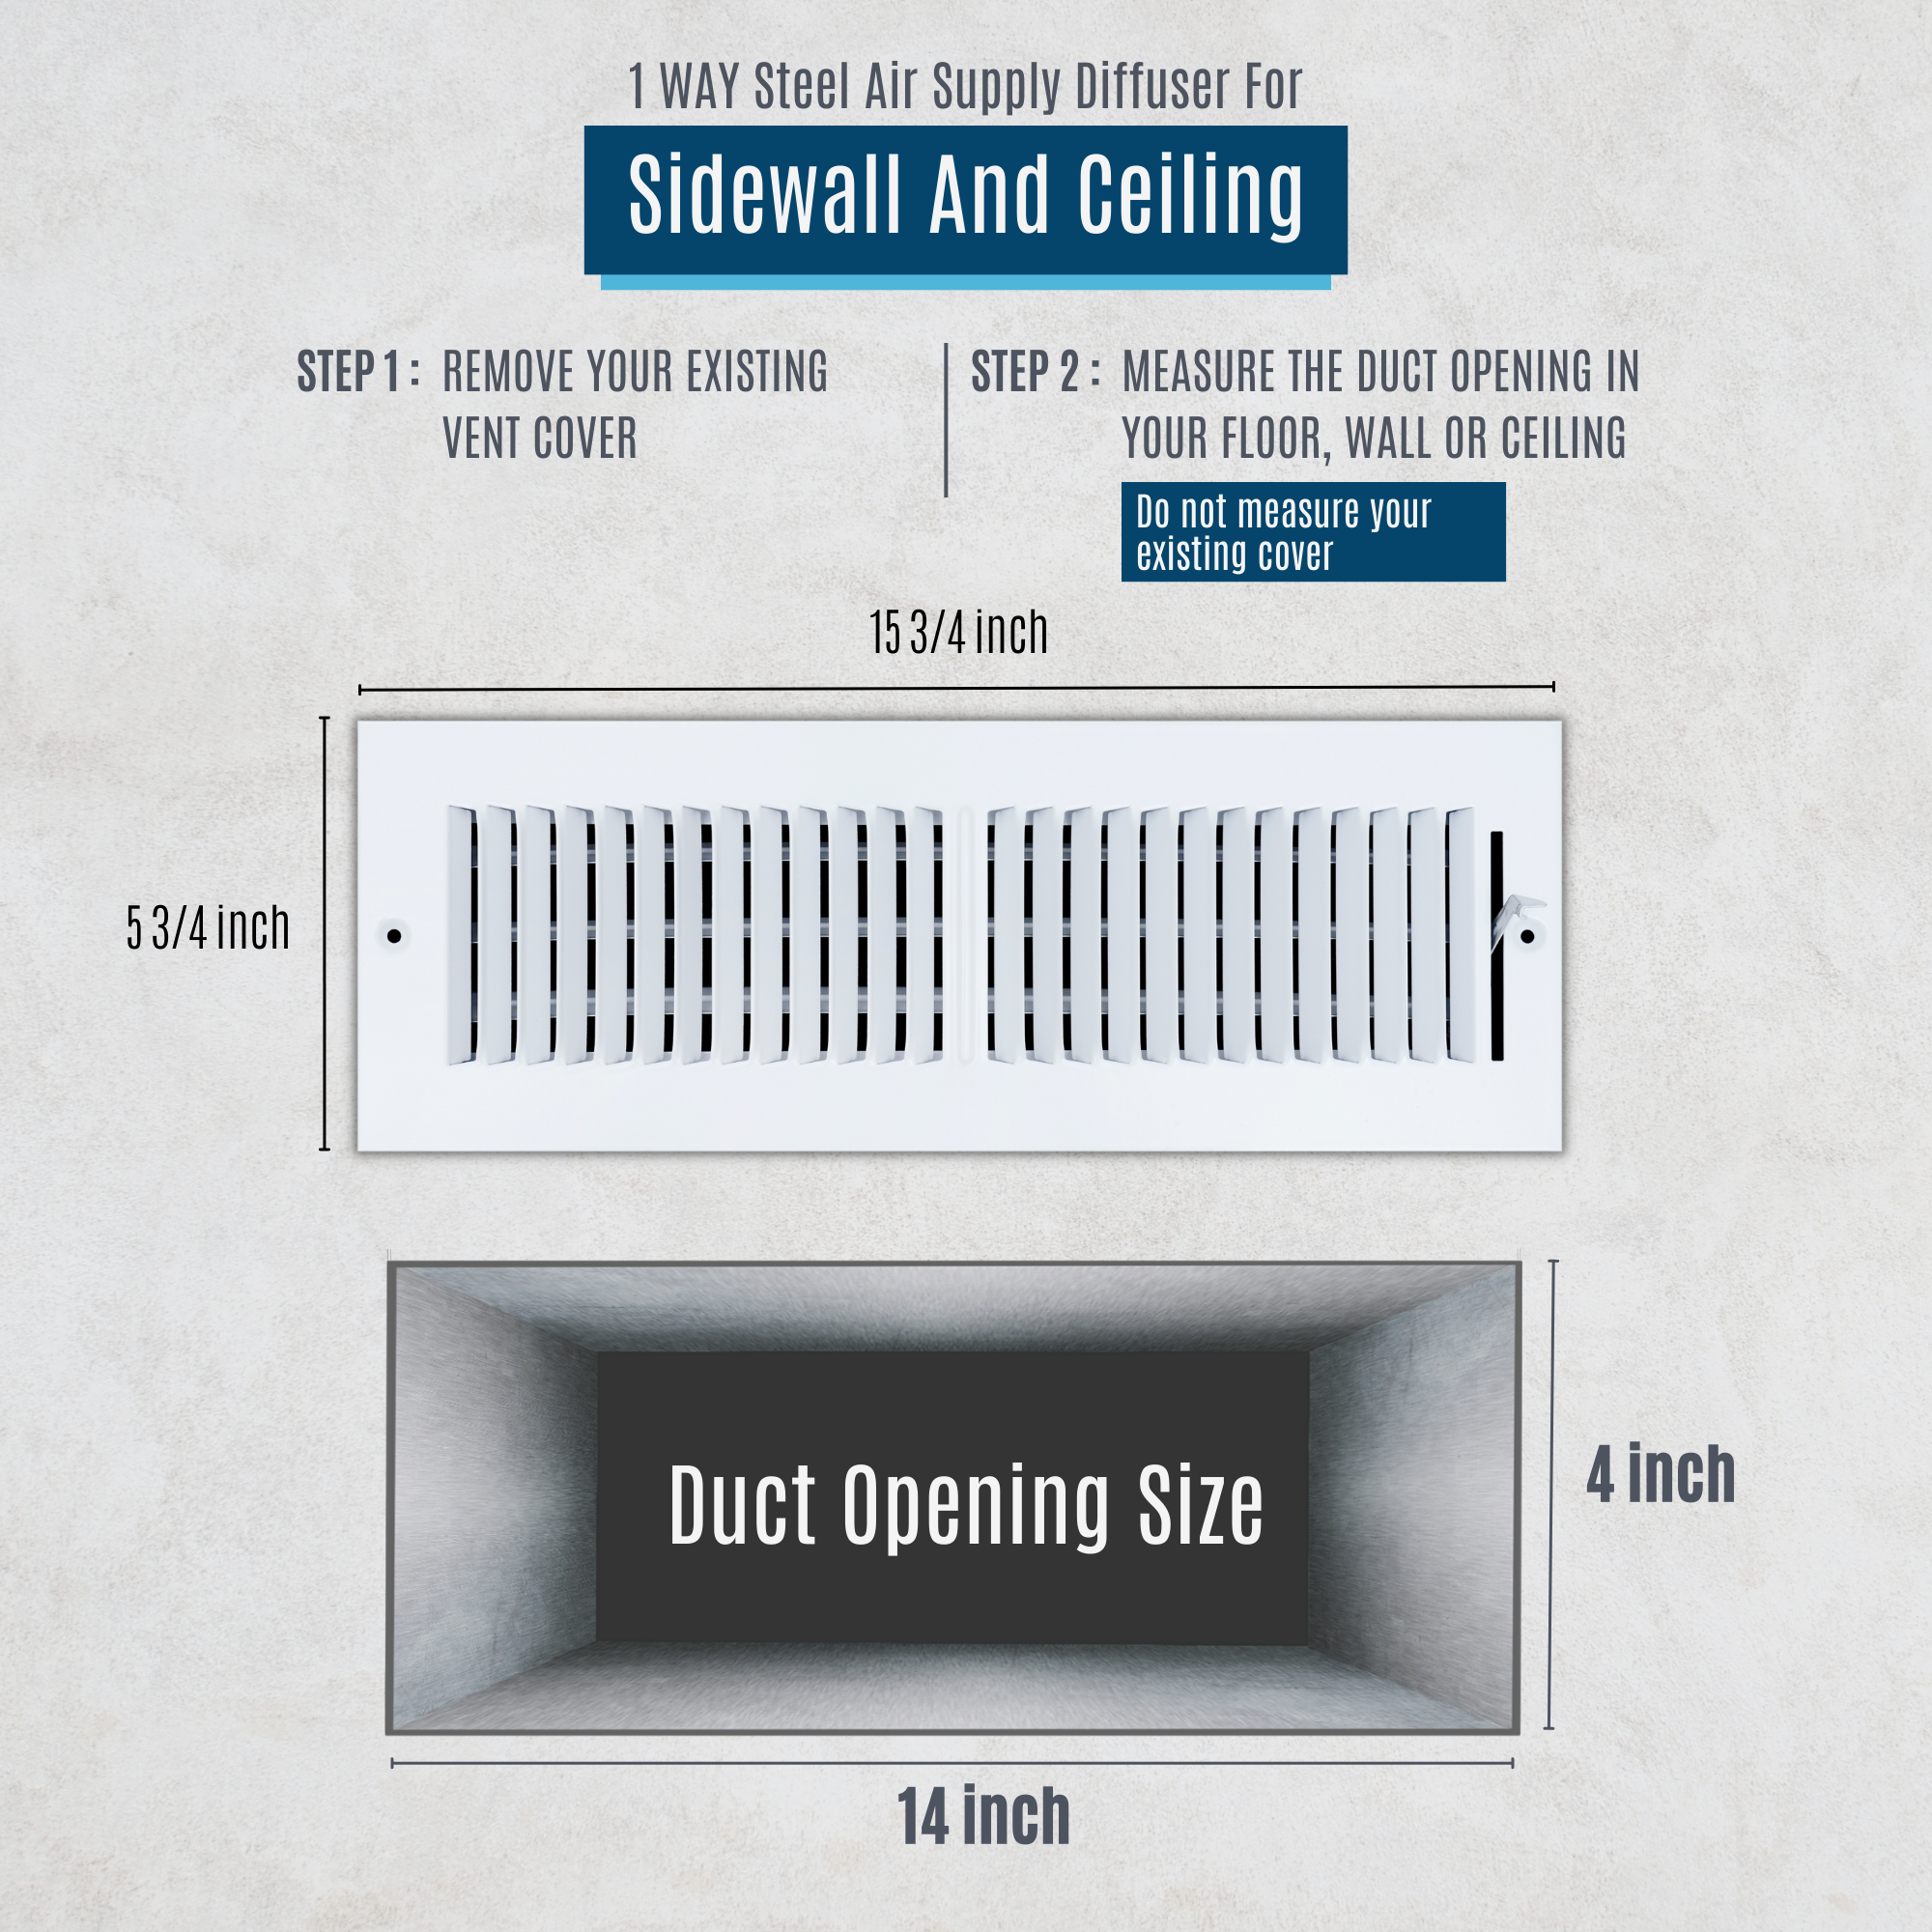 14 X 4 Duct Opening | 2 WAY Steel Air Supply Diffuser for Sidewall and Ceiling